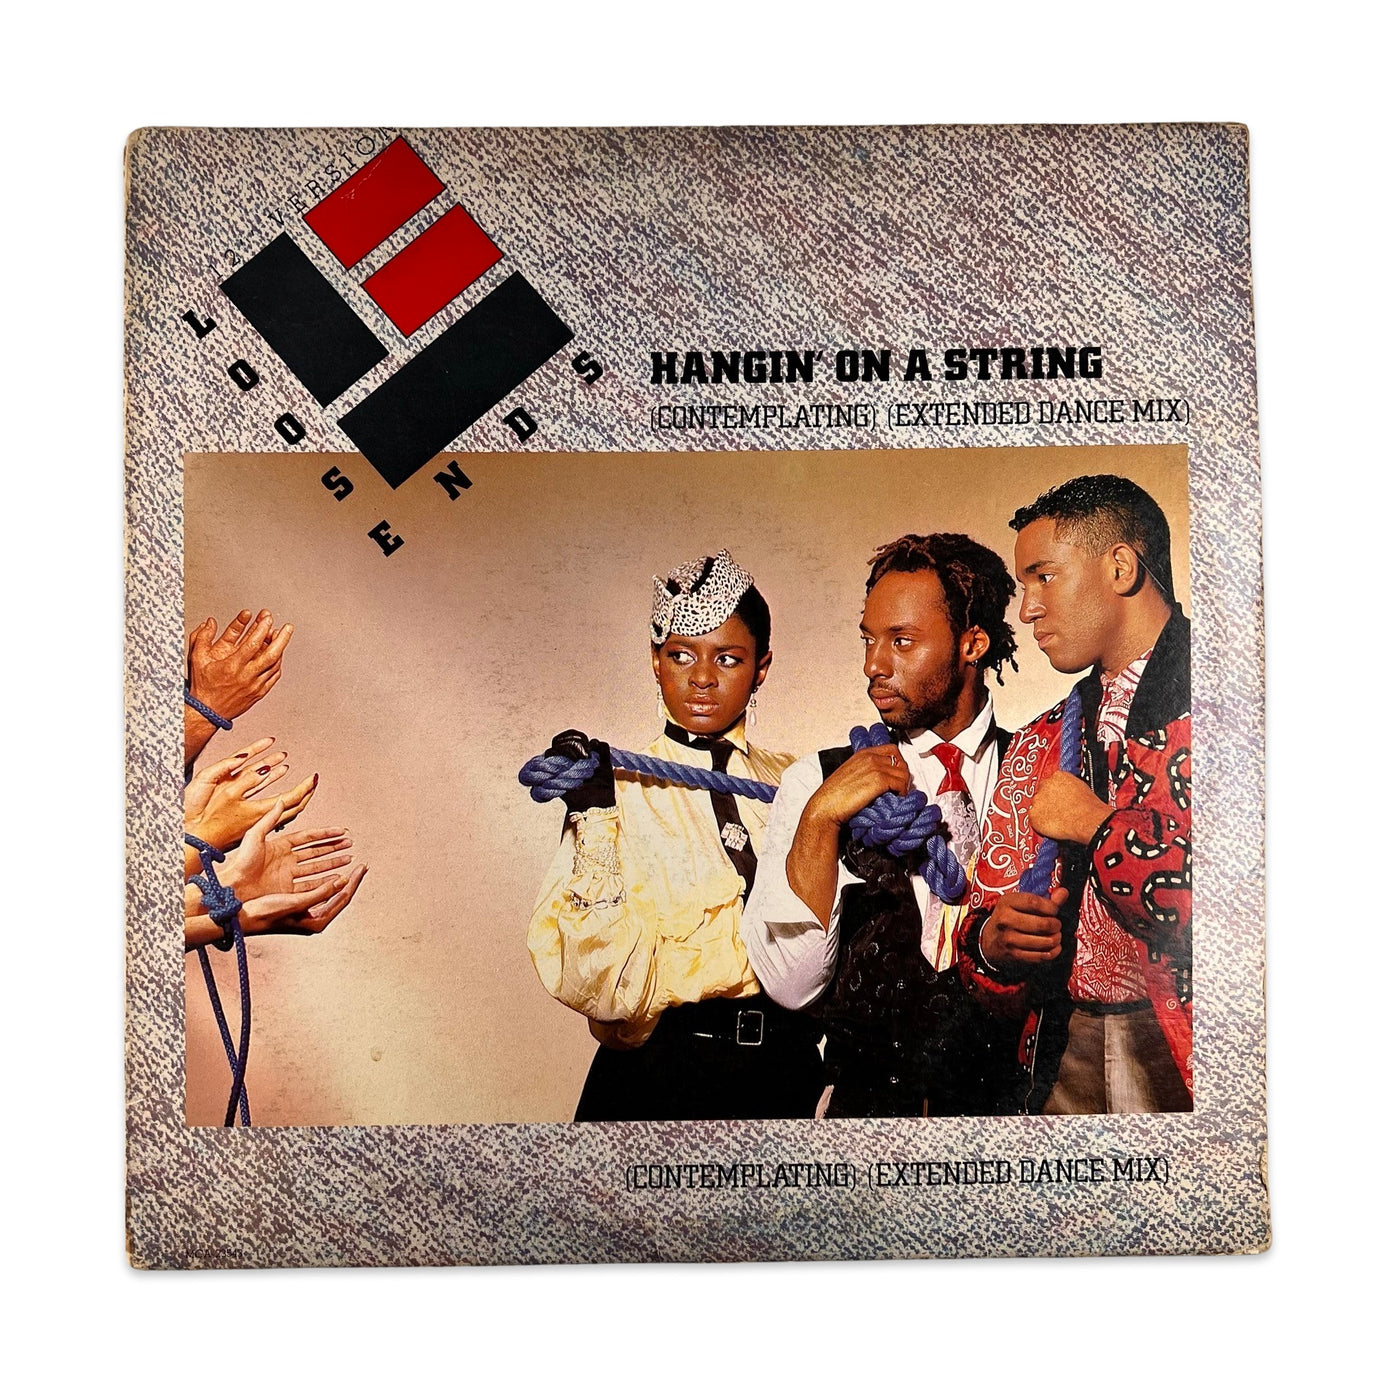 Loose Ends – Hangin' On A String (Contemplating)